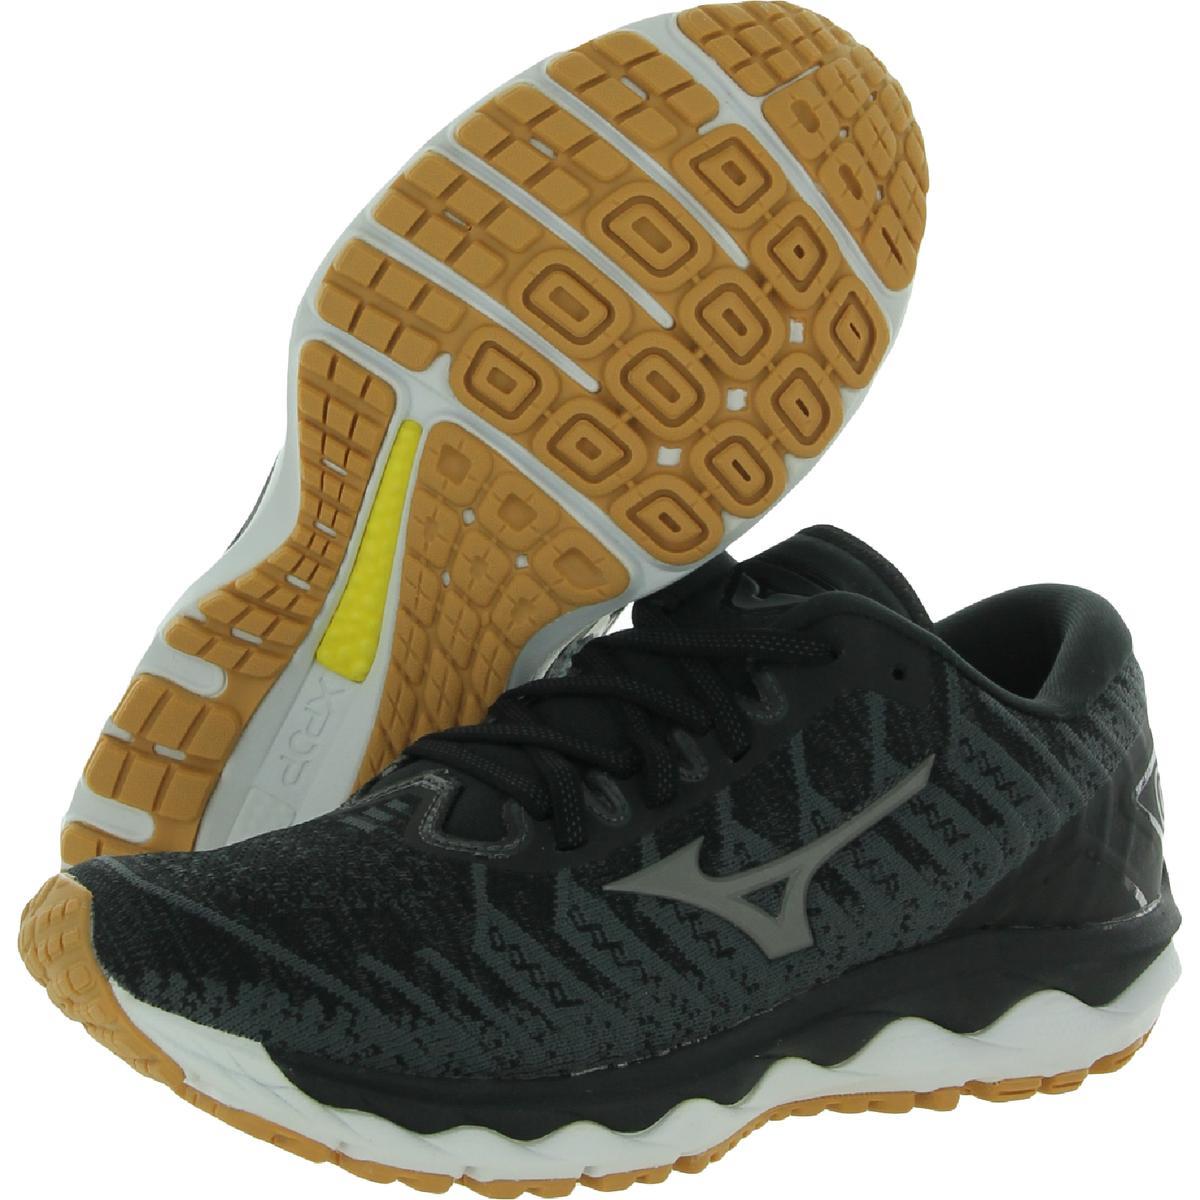 Mizuno Mens Wave Sky 4 Knit Fitness Trainers Running Shoes Sneakers Bhfo 9967 Dark Shadow